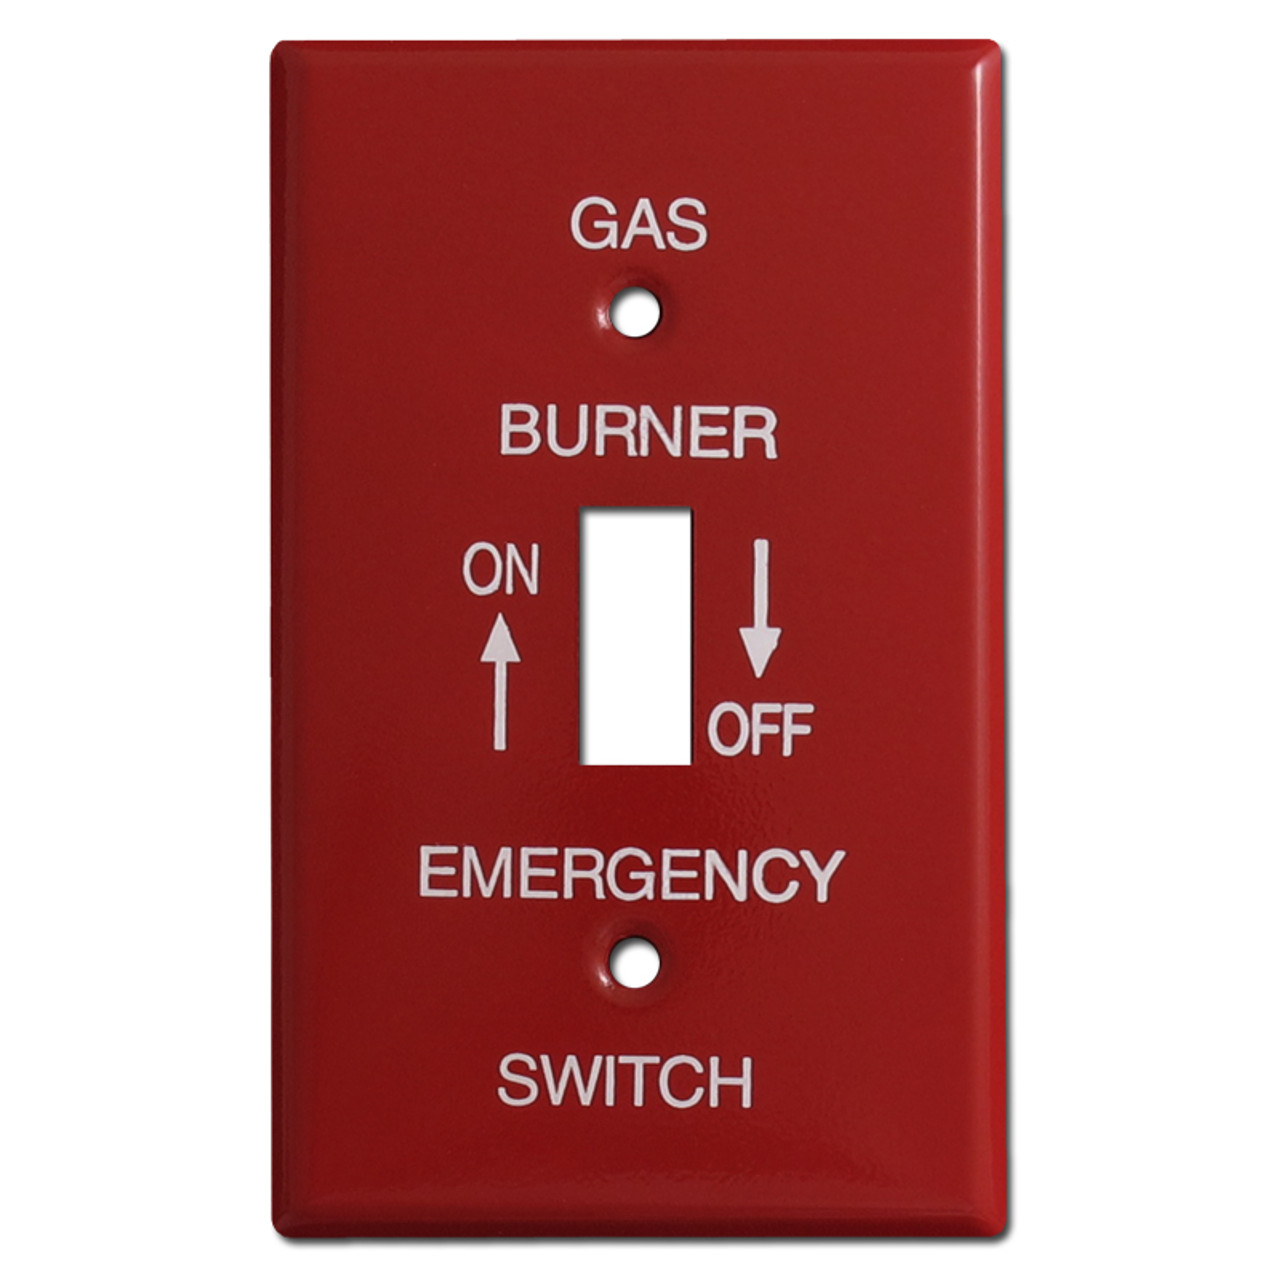 AMERELLE Red 1-Gang Toggle Wall Plate Gas Burner Emergency Off C978T LOT OF 3 